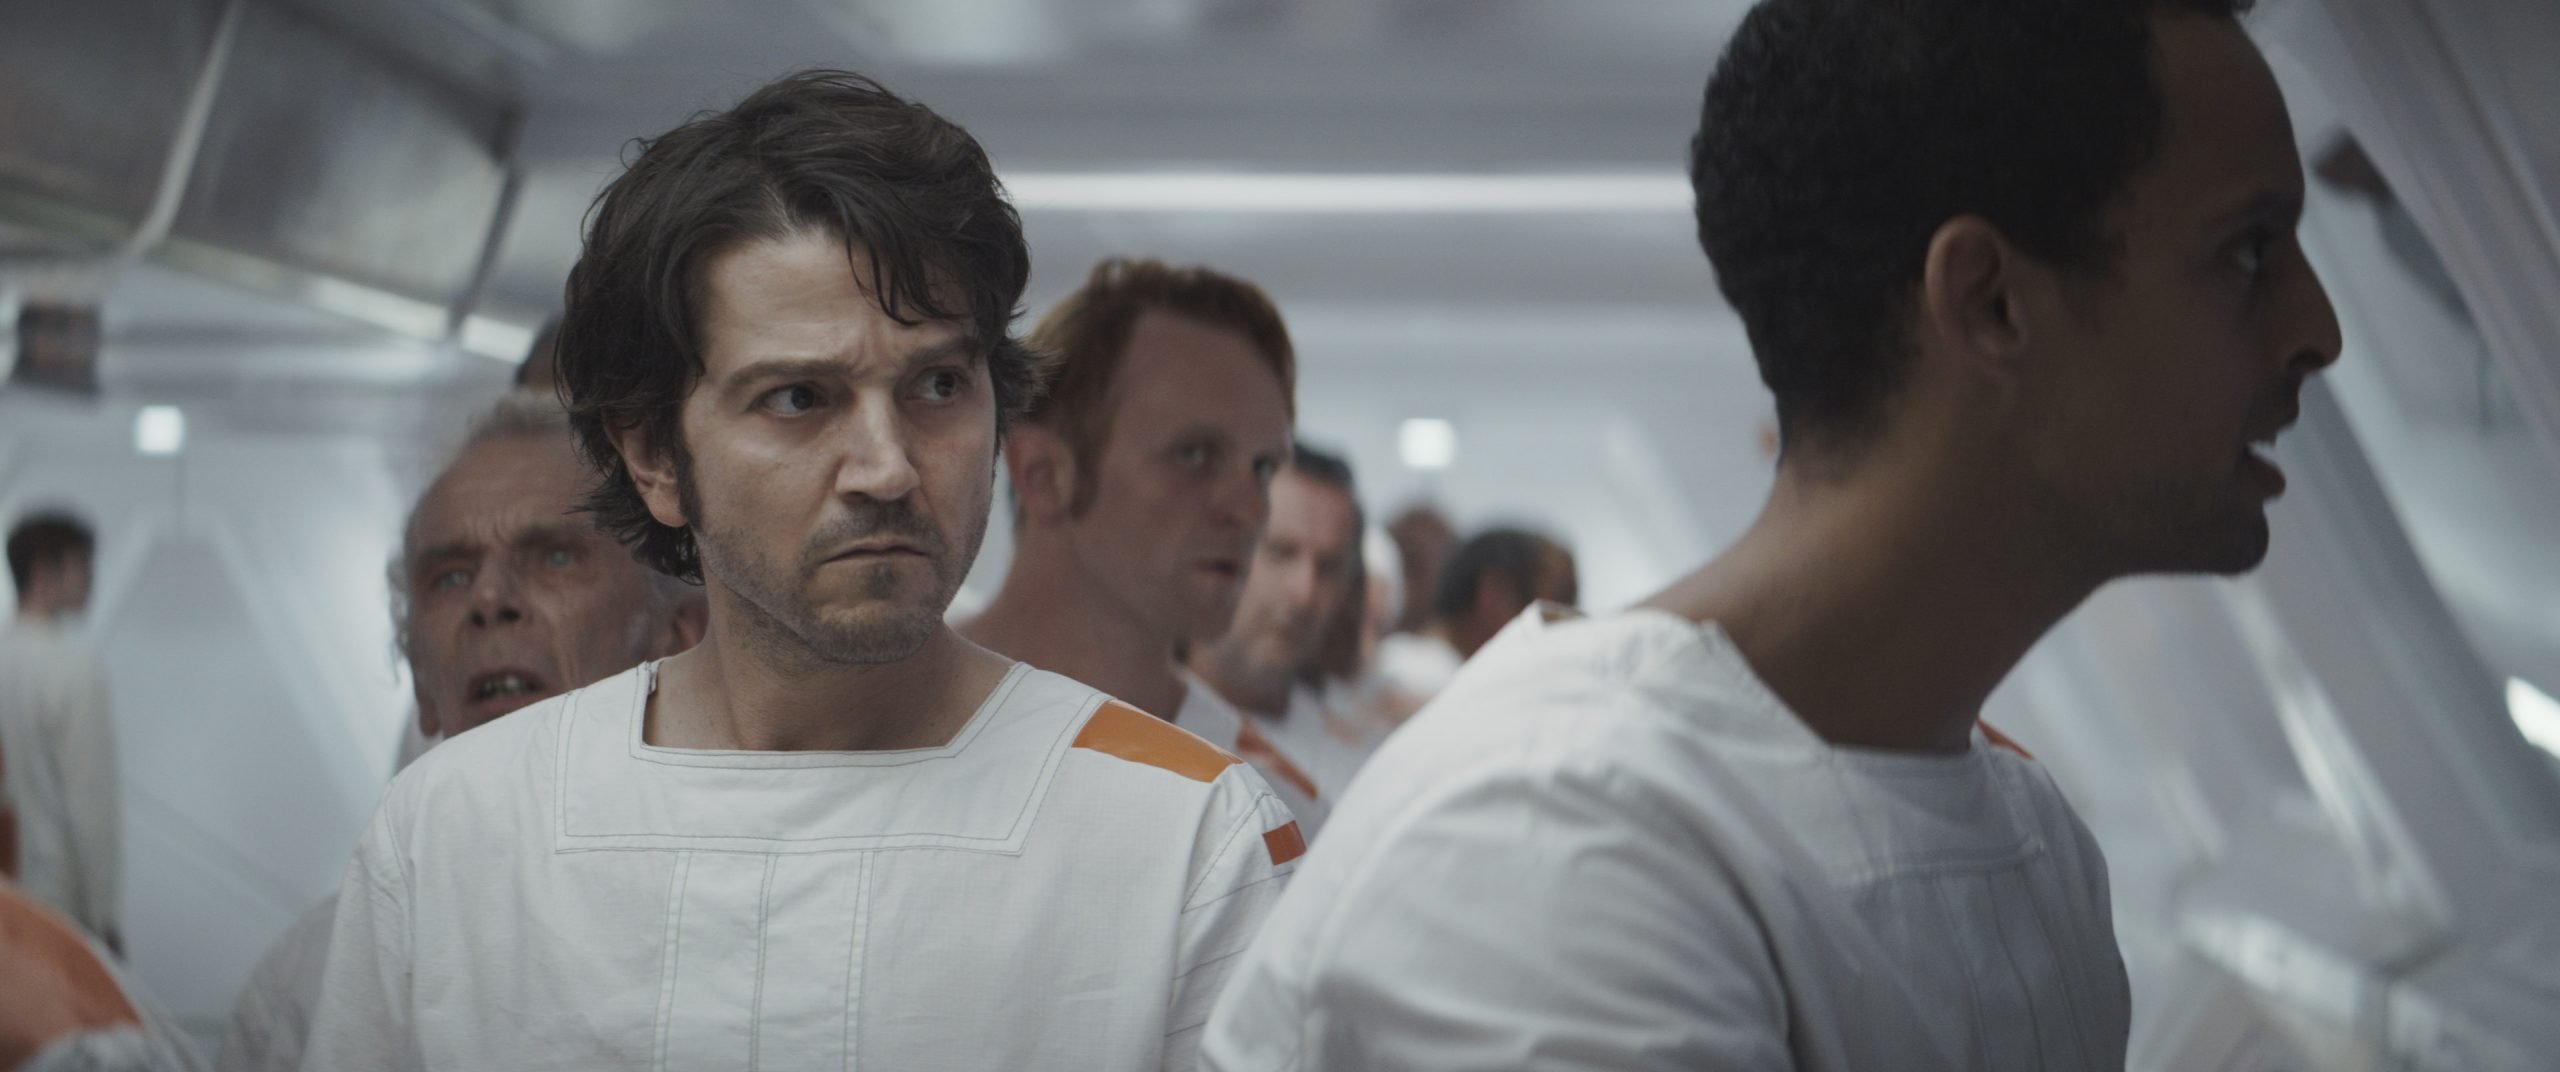 Cassian Andor talks to inmate